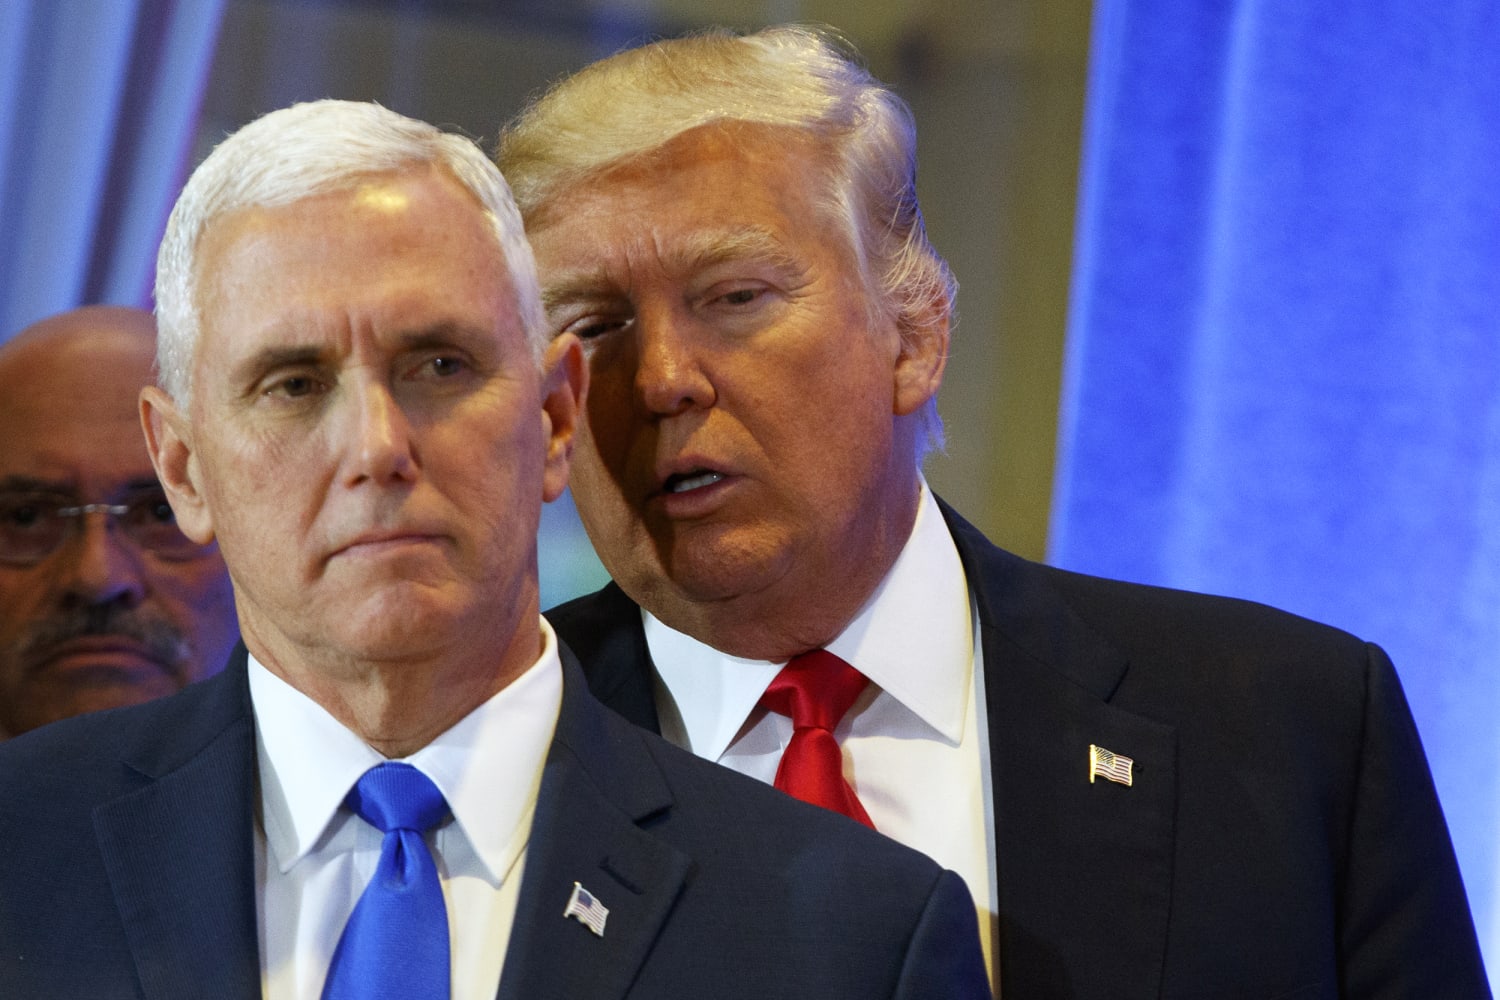 It sure looks like Trump solicited a crime of violence against his own vice president